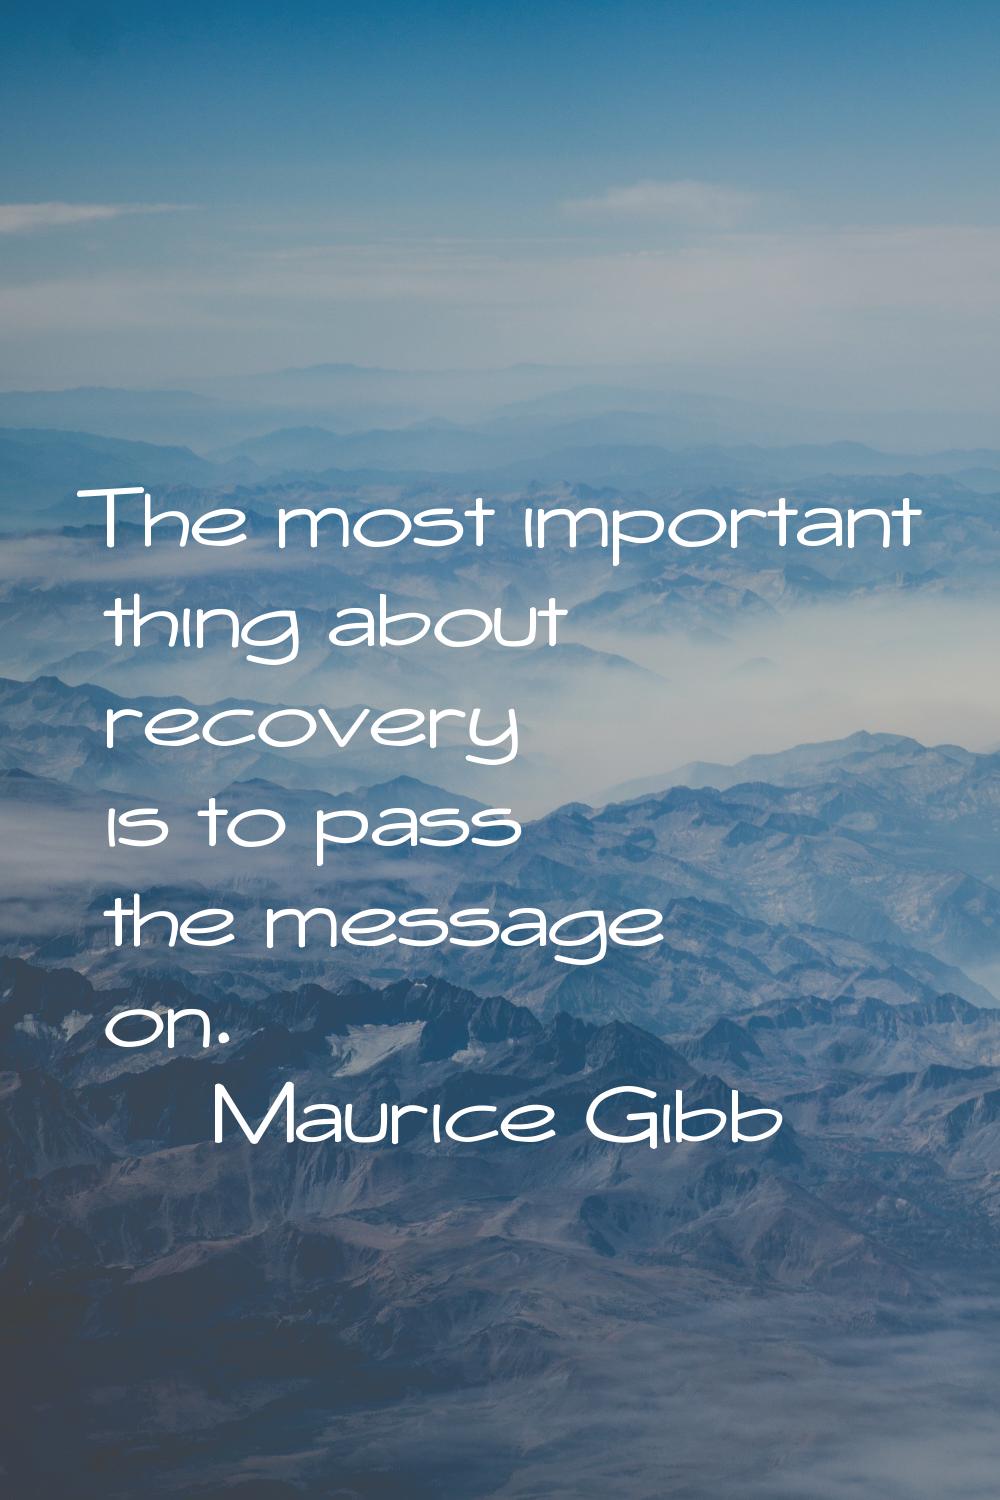 The most important thing about recovery is to pass the message on.